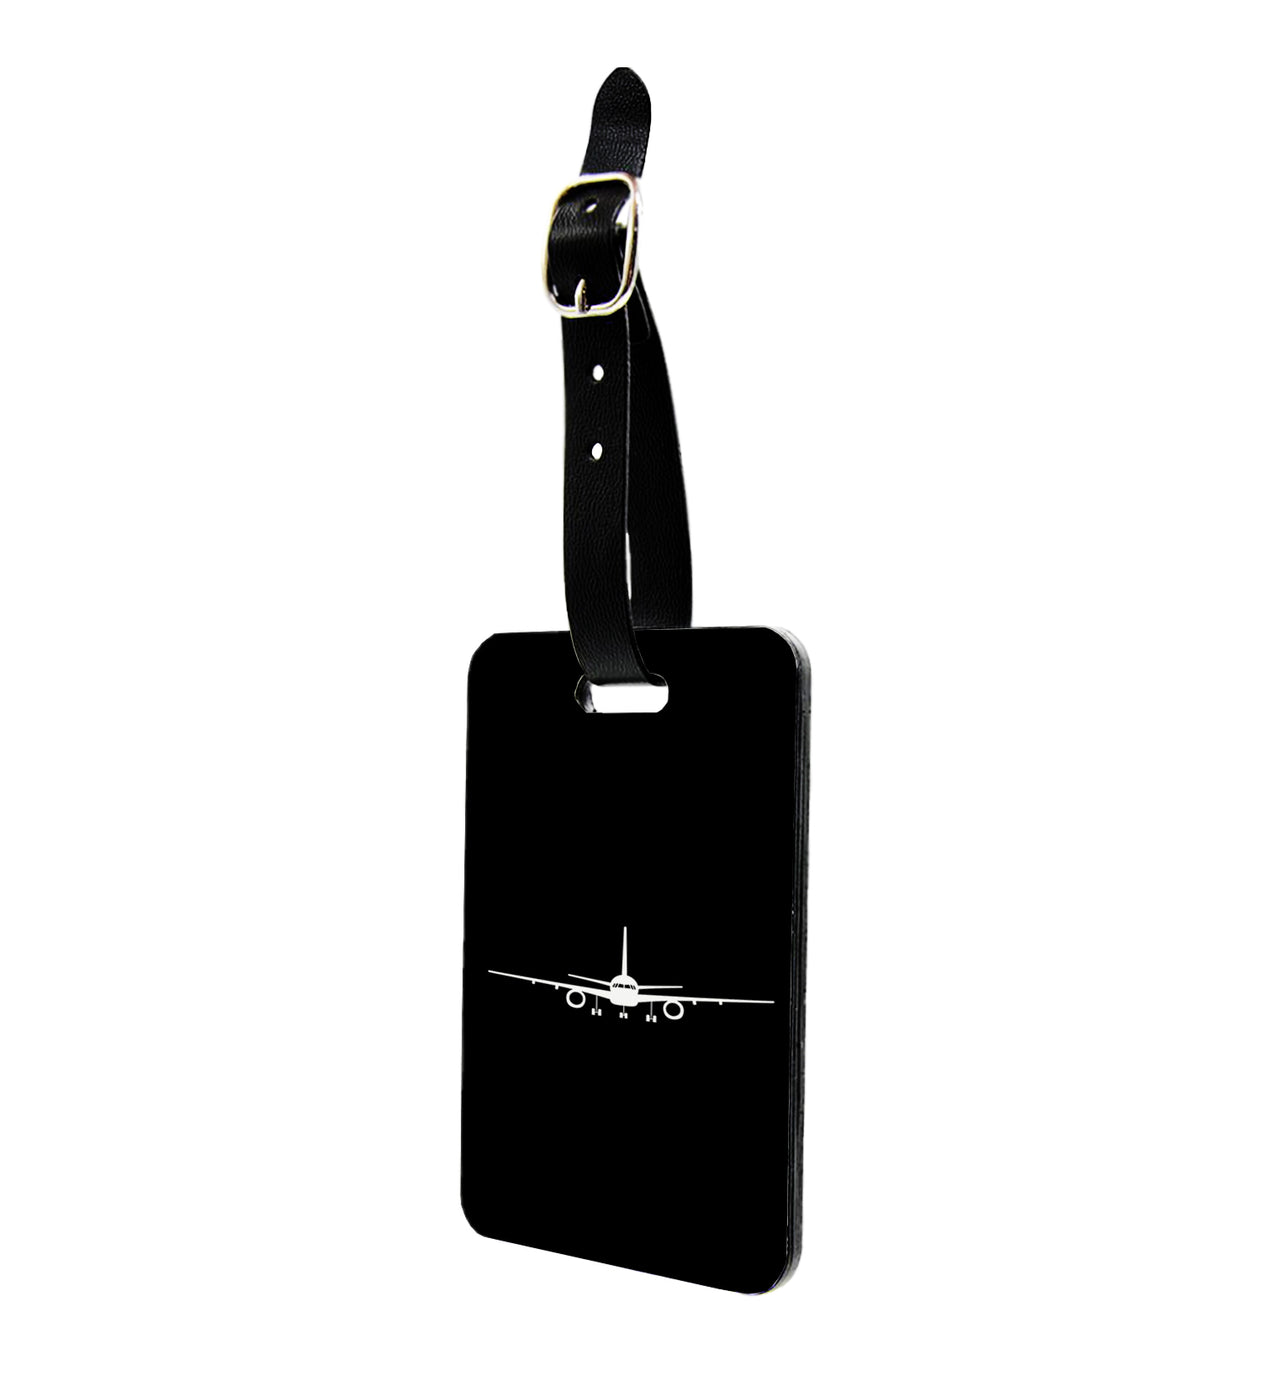 Boeing 757 Silhouette Designed Luggage Tag